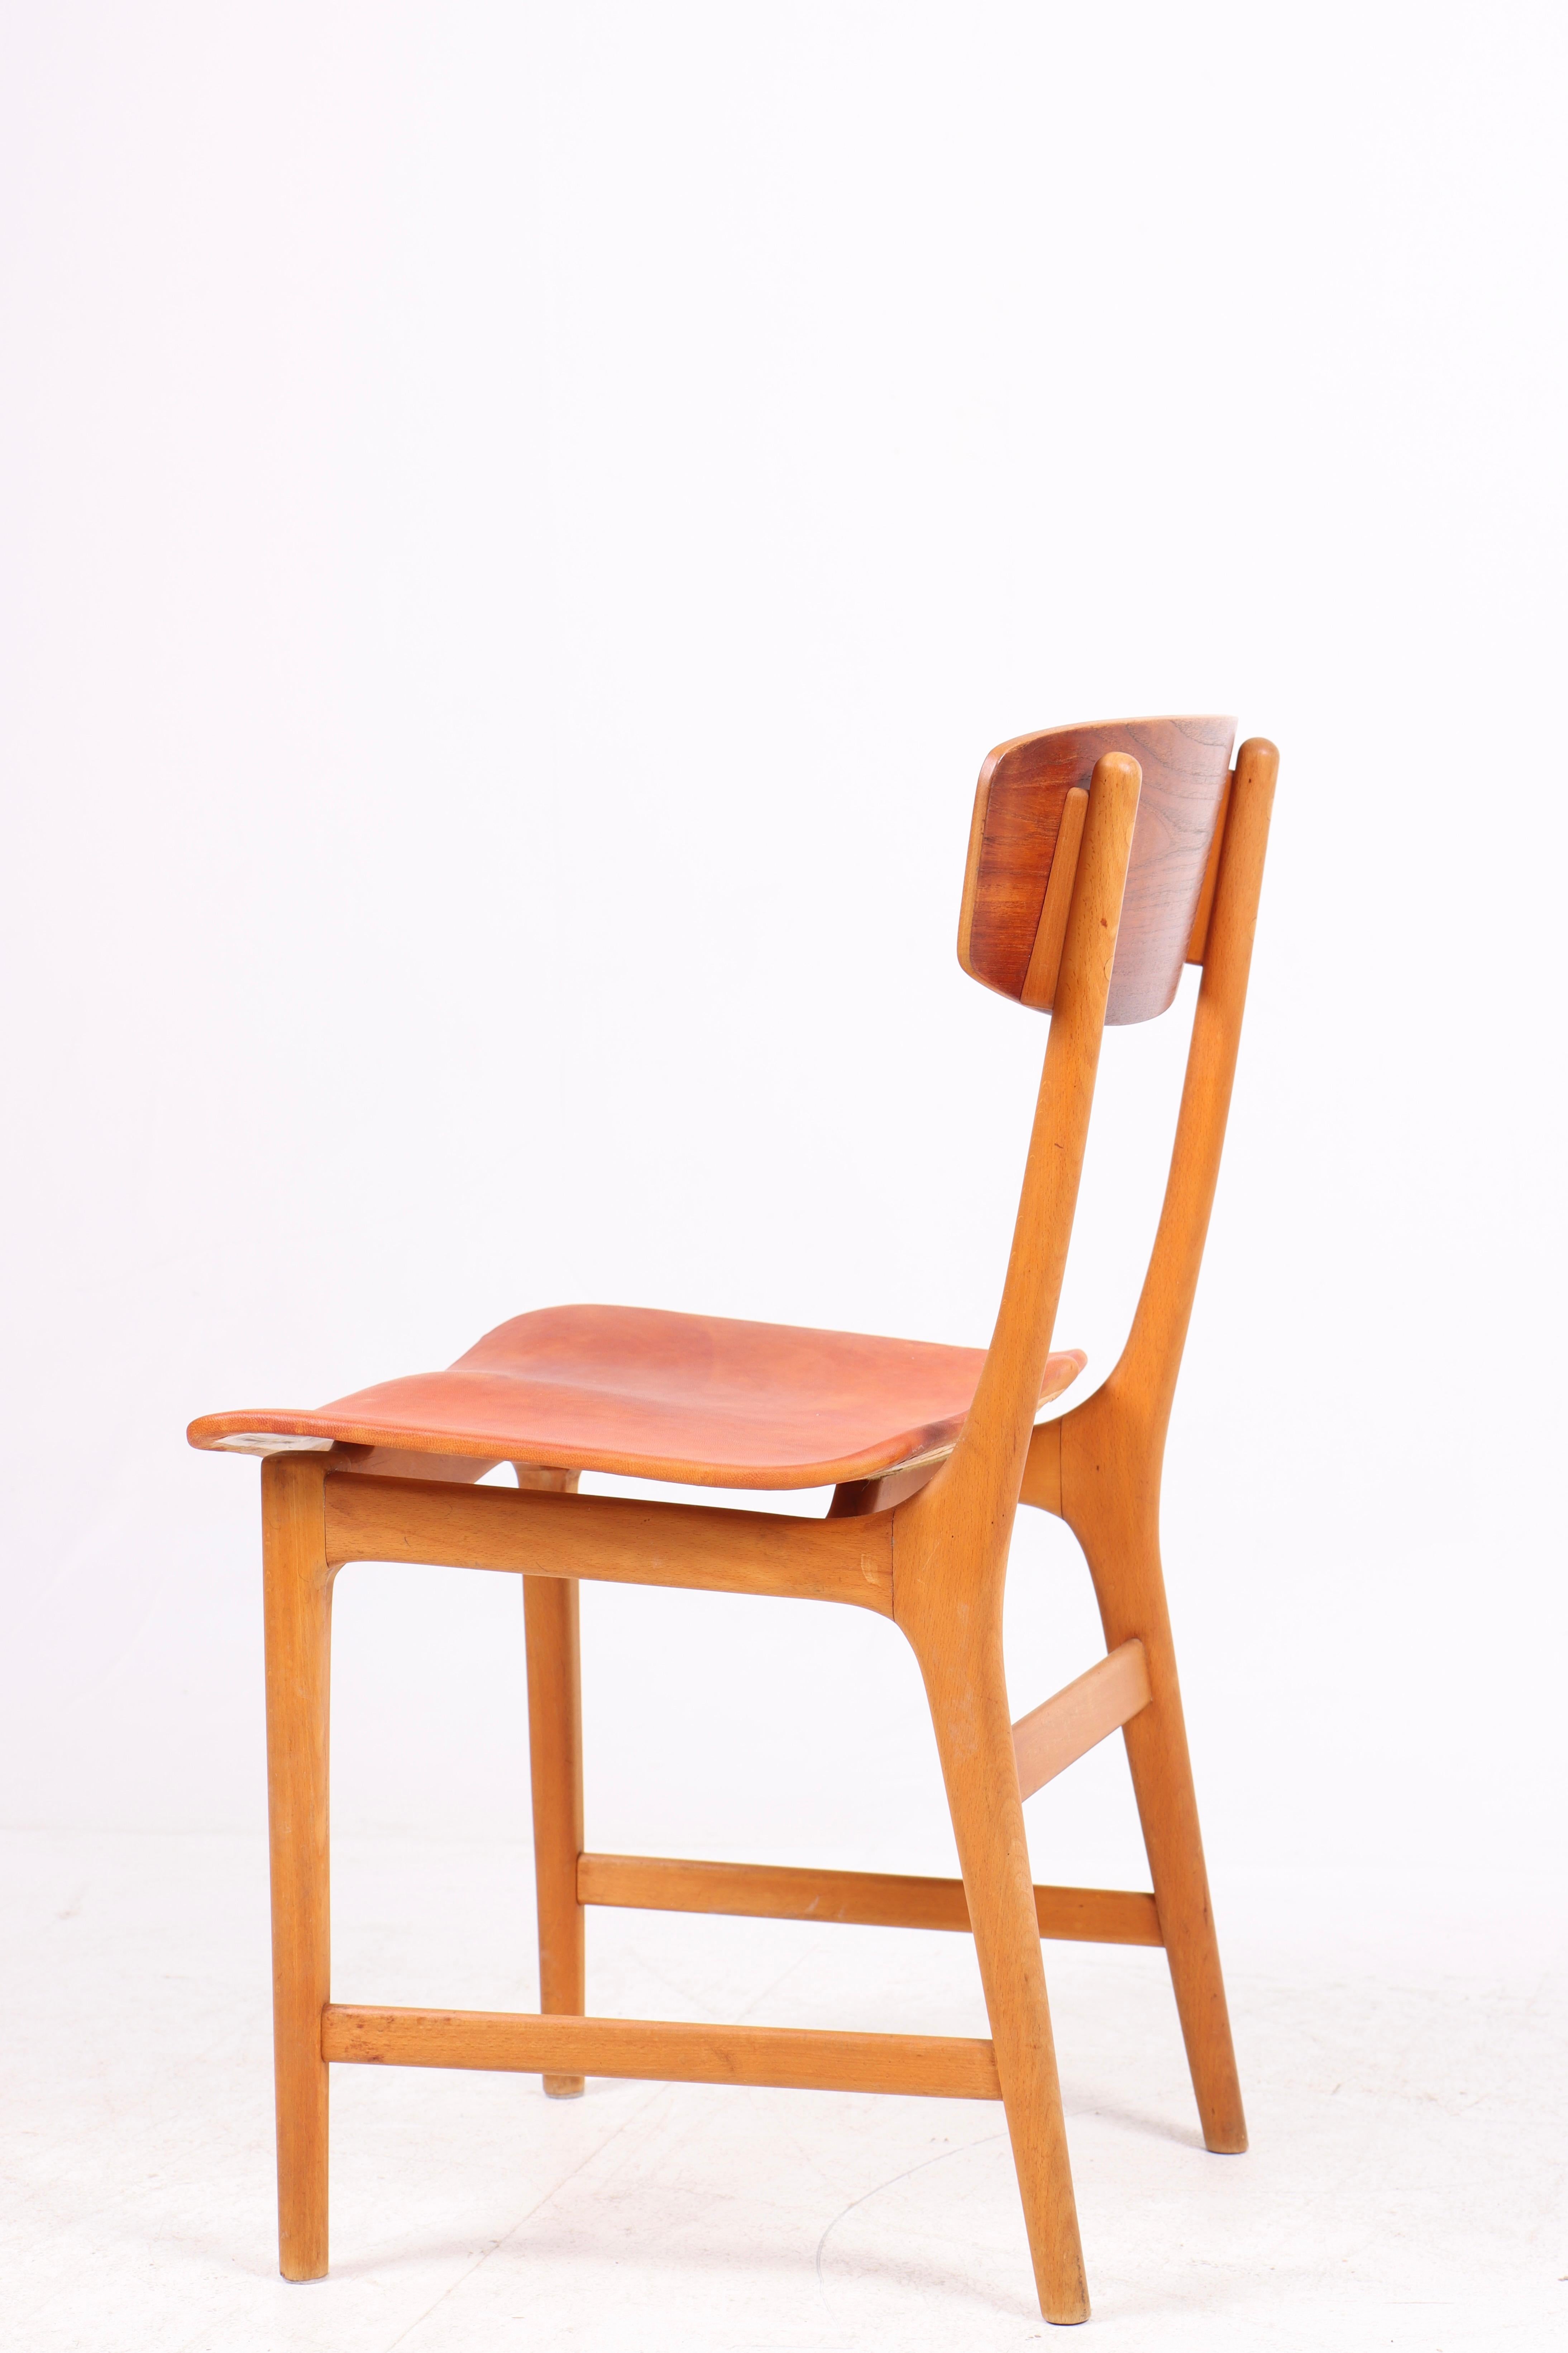 Set of Four Side Chairs in Teak and Leather, Danish Design, 1960s For Sale 2